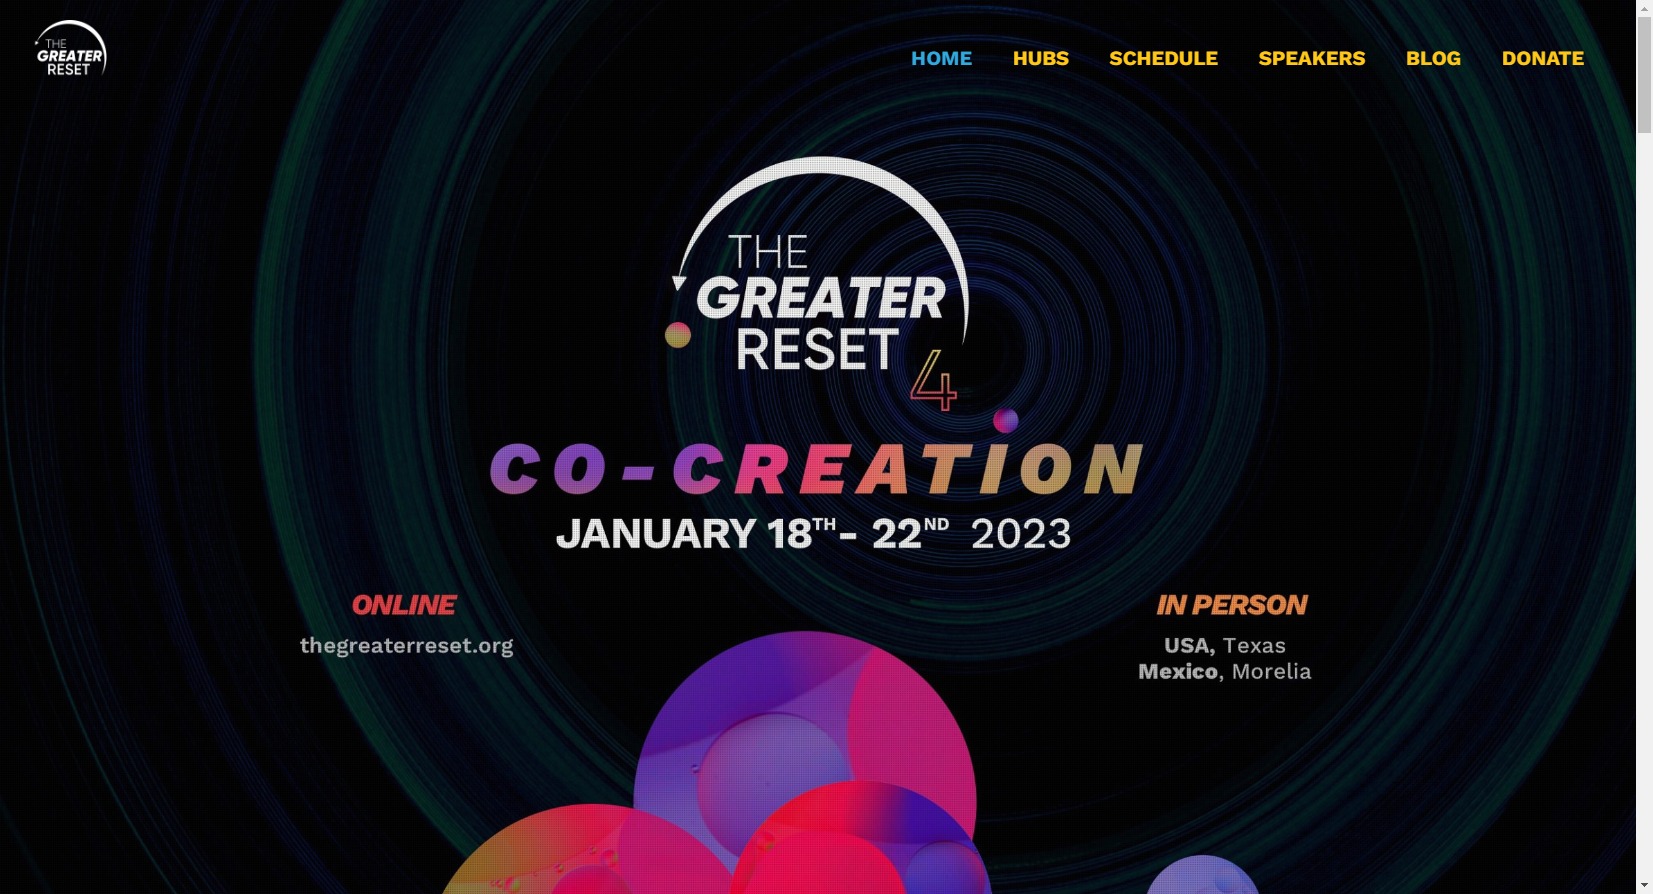 The-Greater-Reset-4-Co-Creation